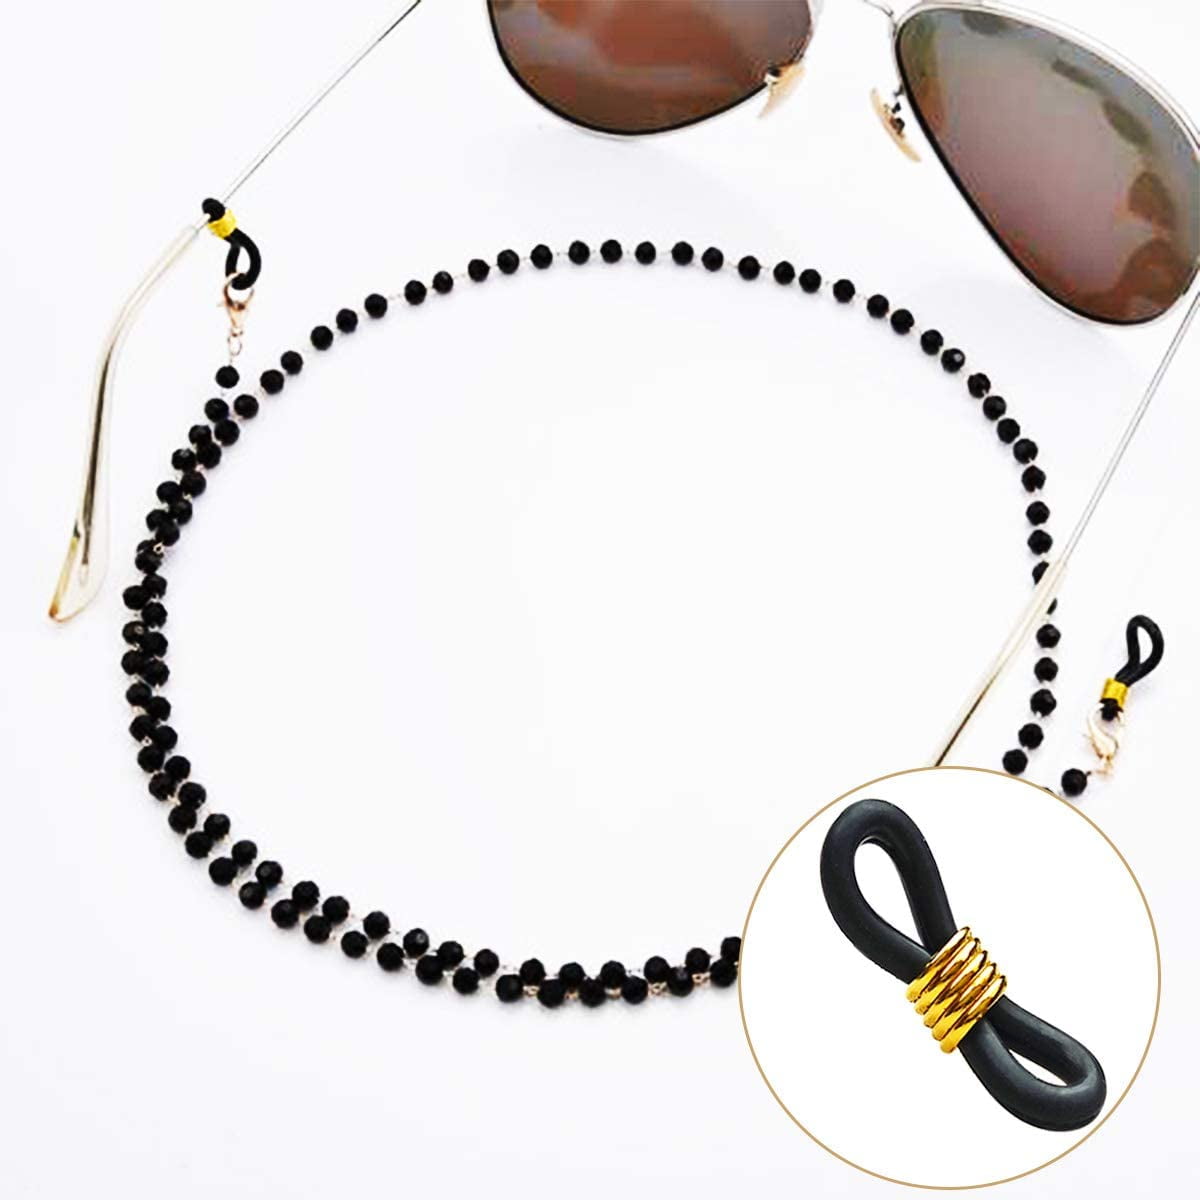 40 Pieces Eyeglass Chain Ends Adjustable Rubber Spectacle End Connectors  for Eye Glasses Holder Necklace Chain (Black and Gold) 